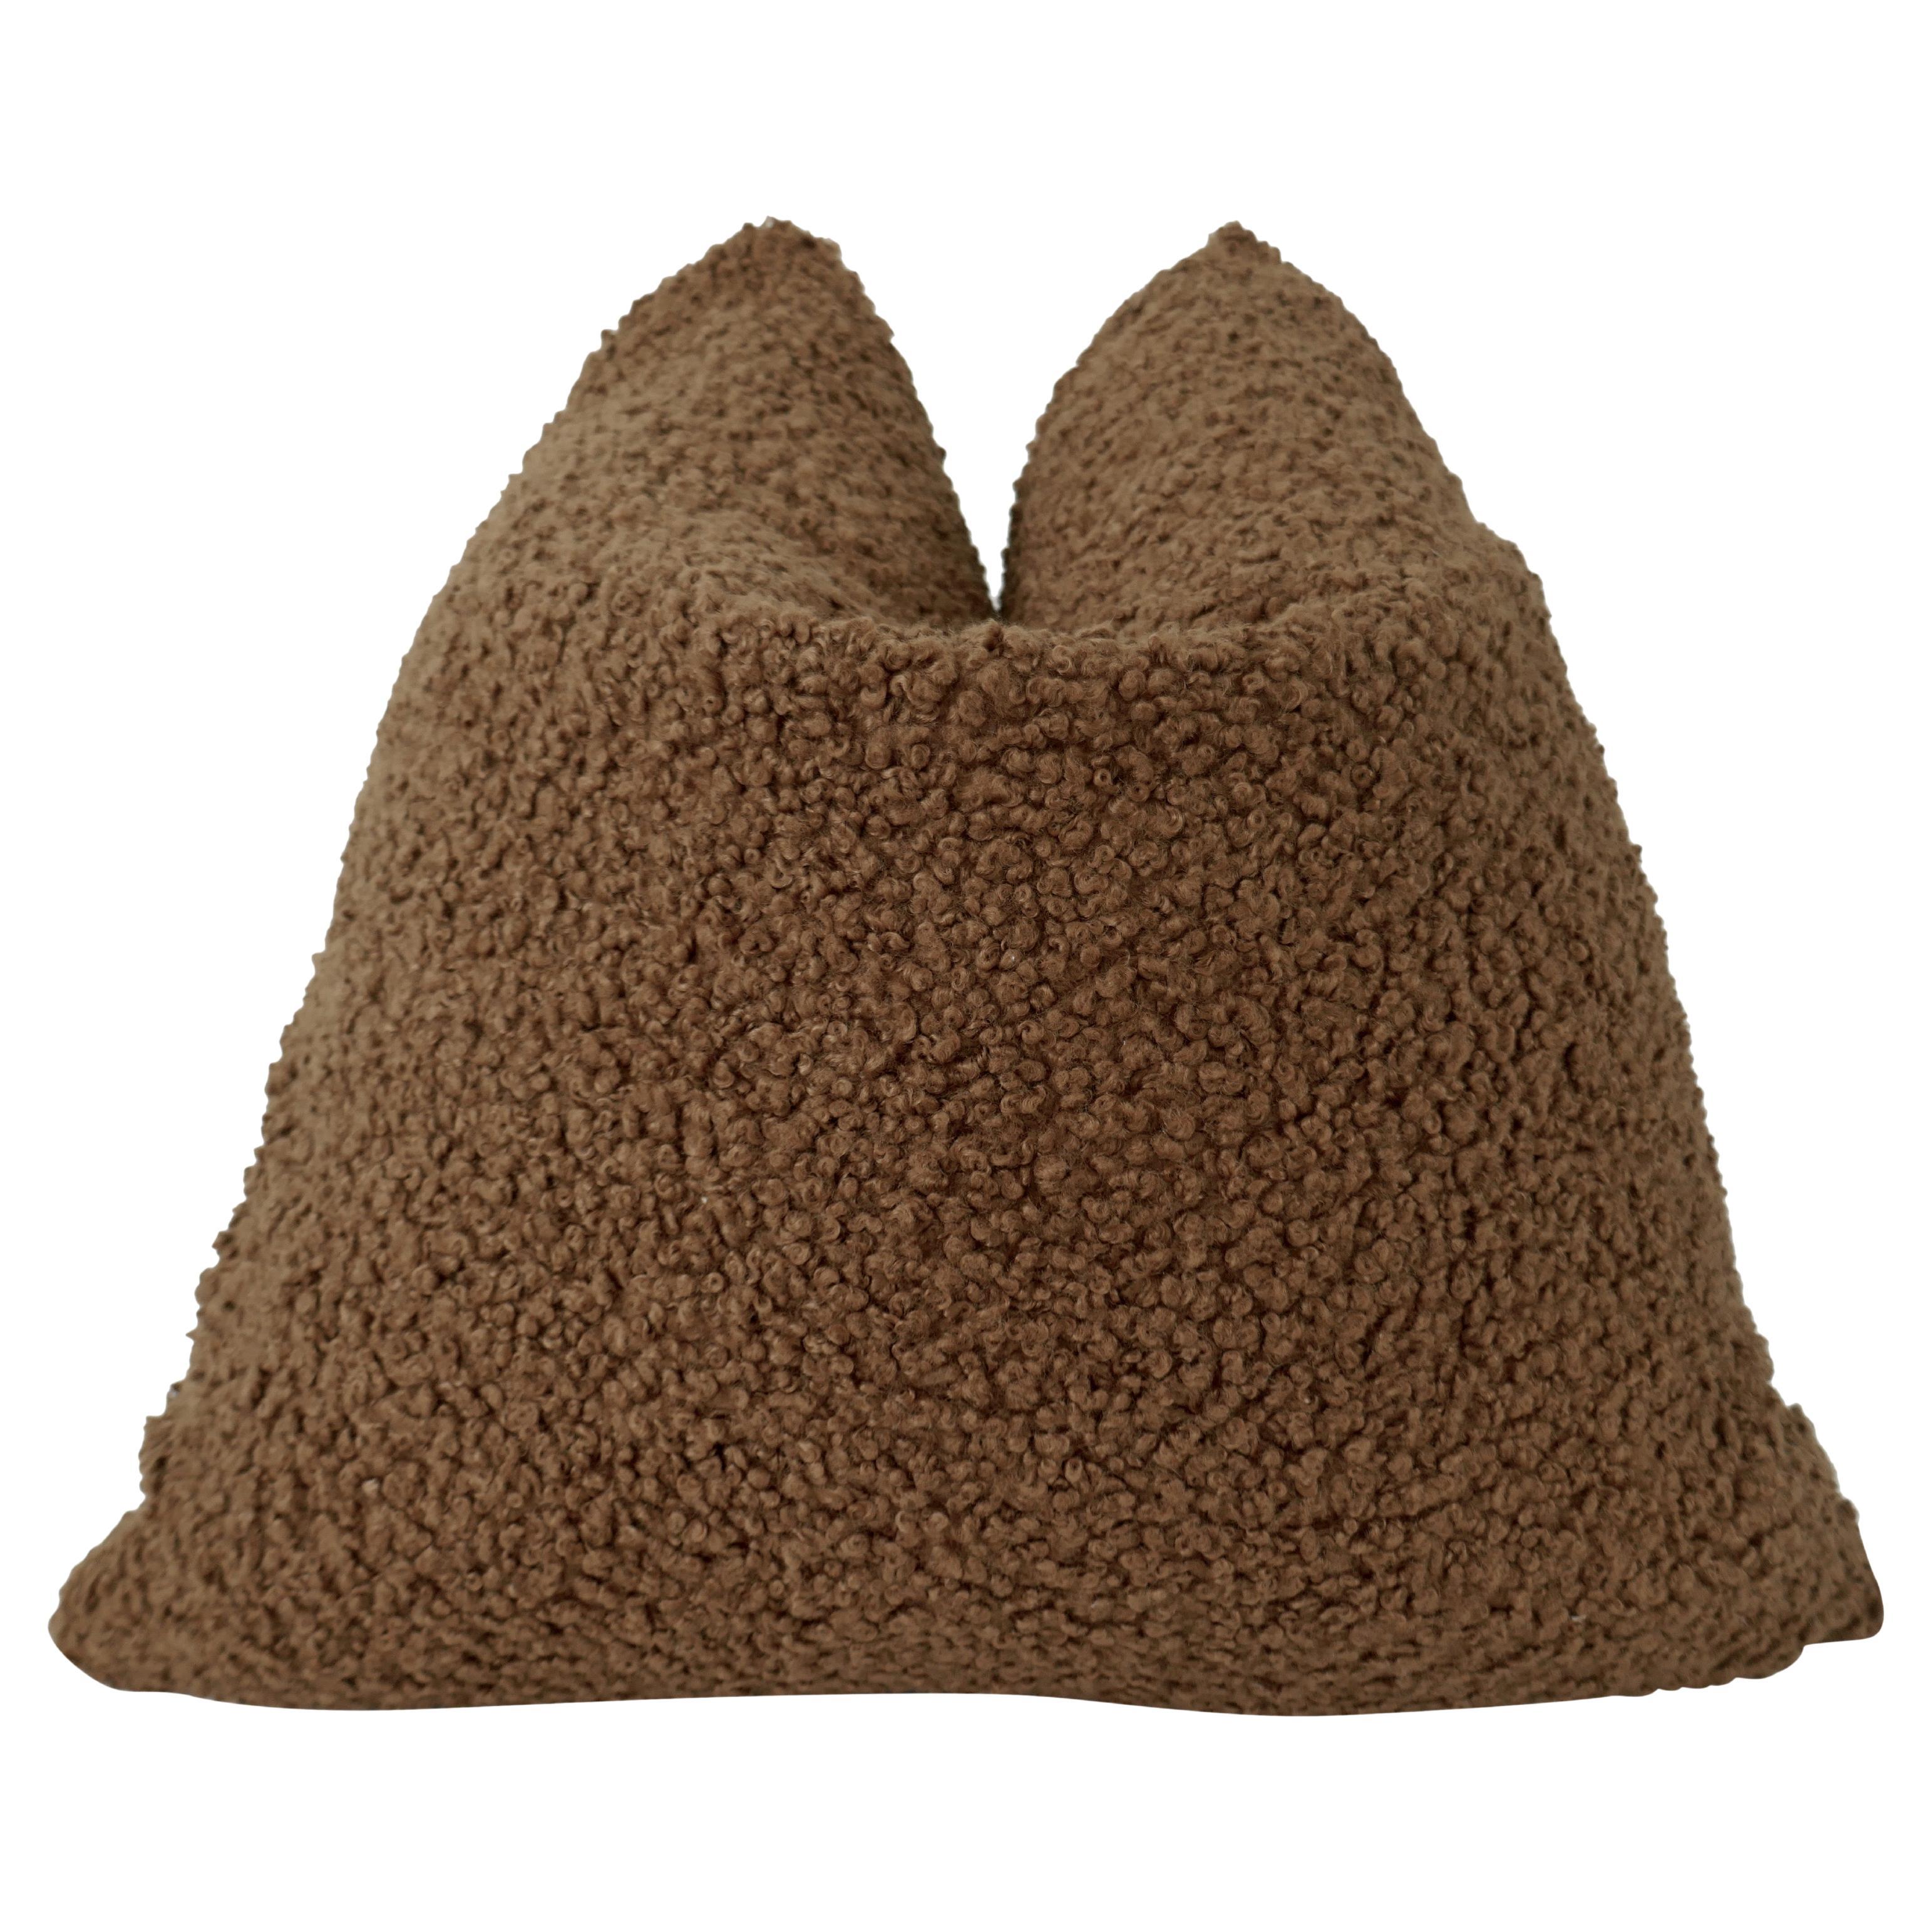 FI Ultra-Luxe Chocolate Shearling Pillow For Sale